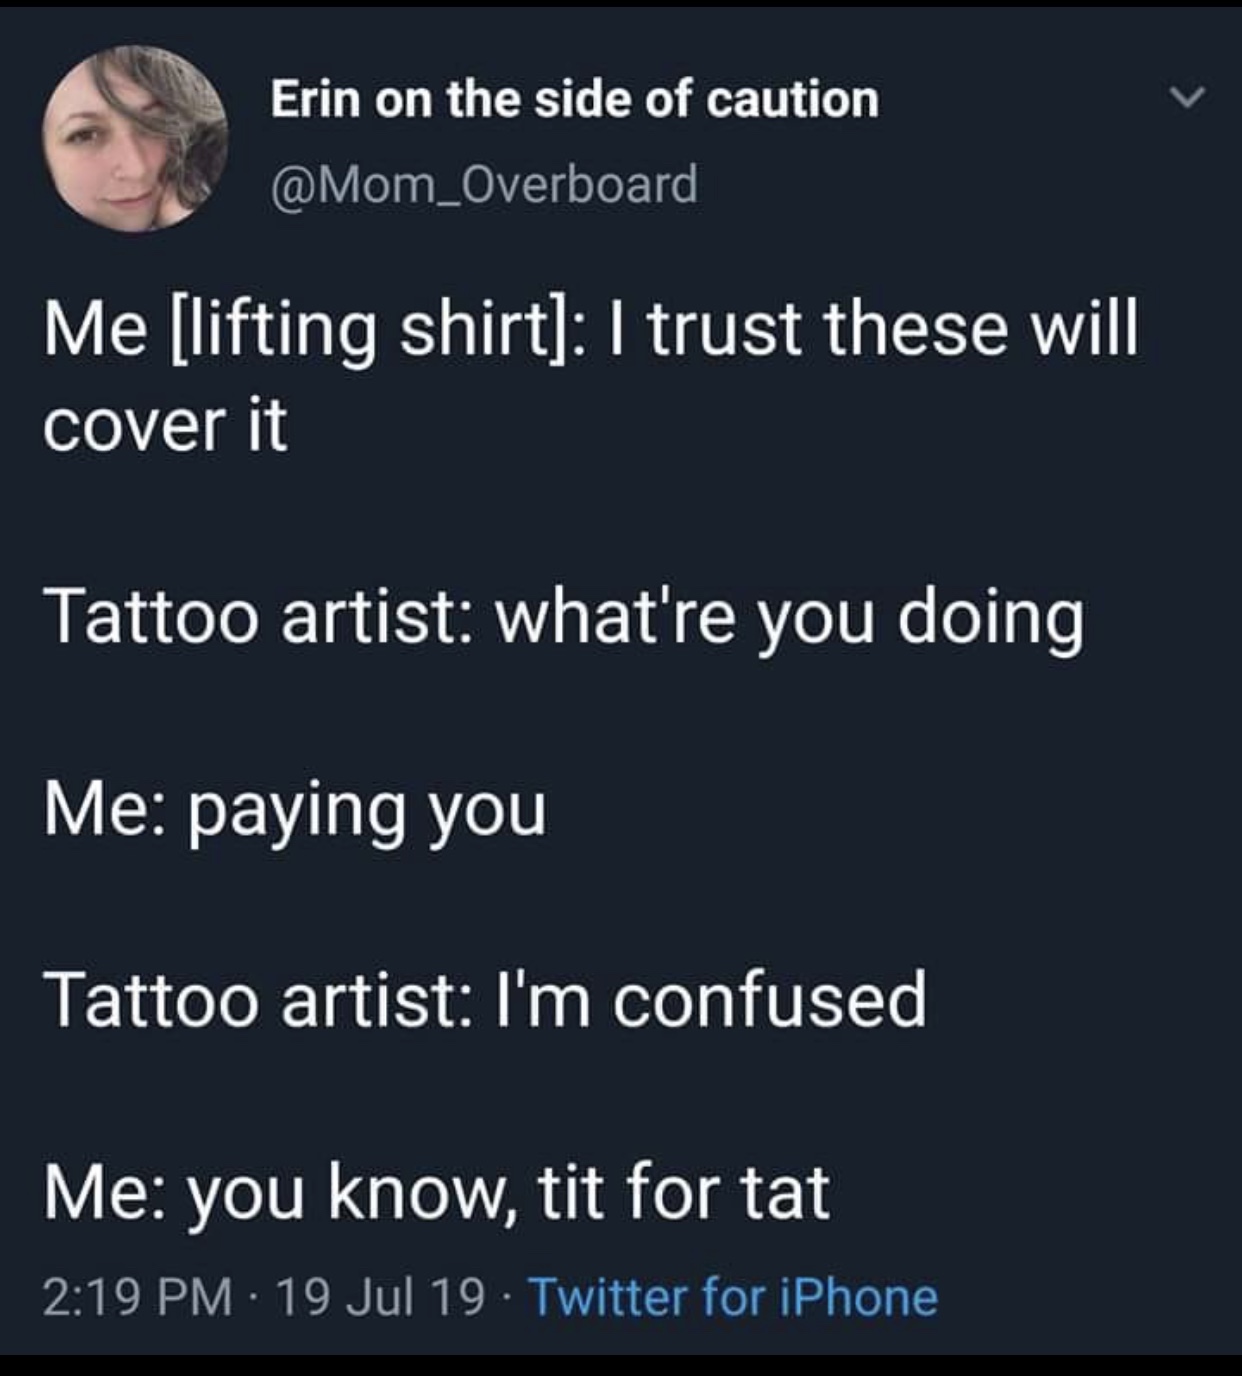 presentation - Erin on the side of caution Me lifting shirt I trust these will cover it Tattoo artist what're you doing Me paying you Tattoo artist I'm confused Me you know, tit for tat 19 Jul 19 Twitter for iPhone